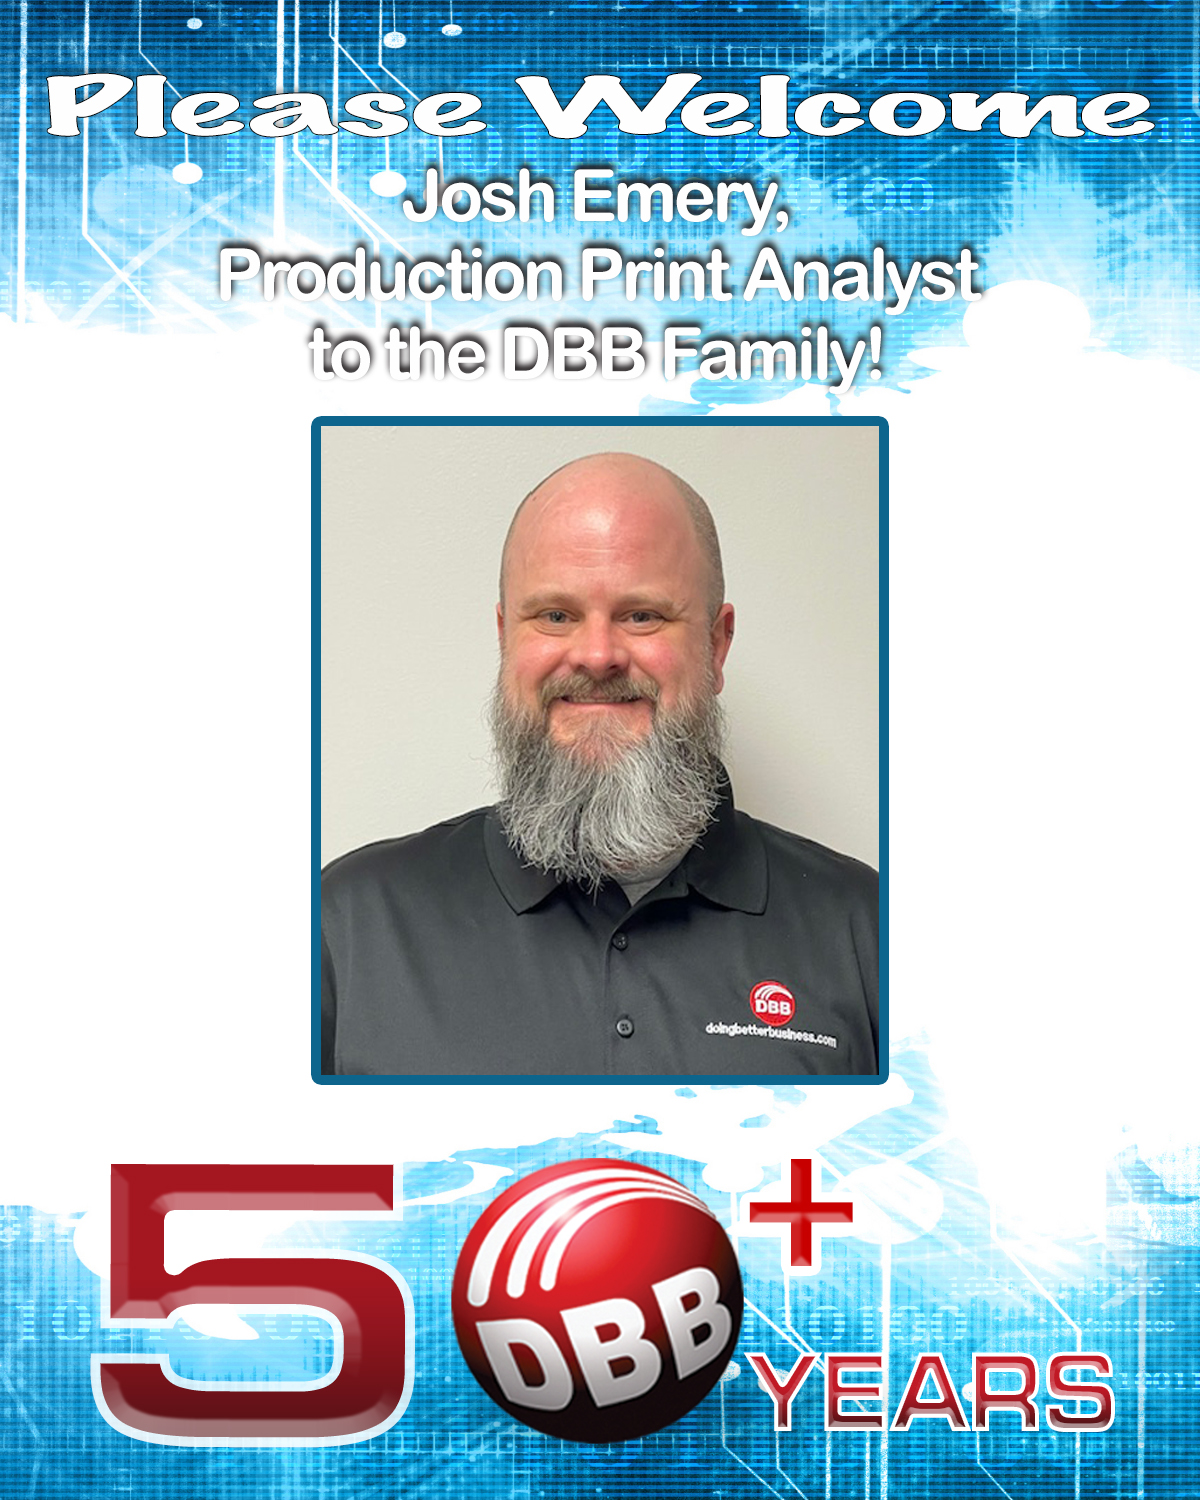 Please Welcome Josh Emery to the DBB Family!